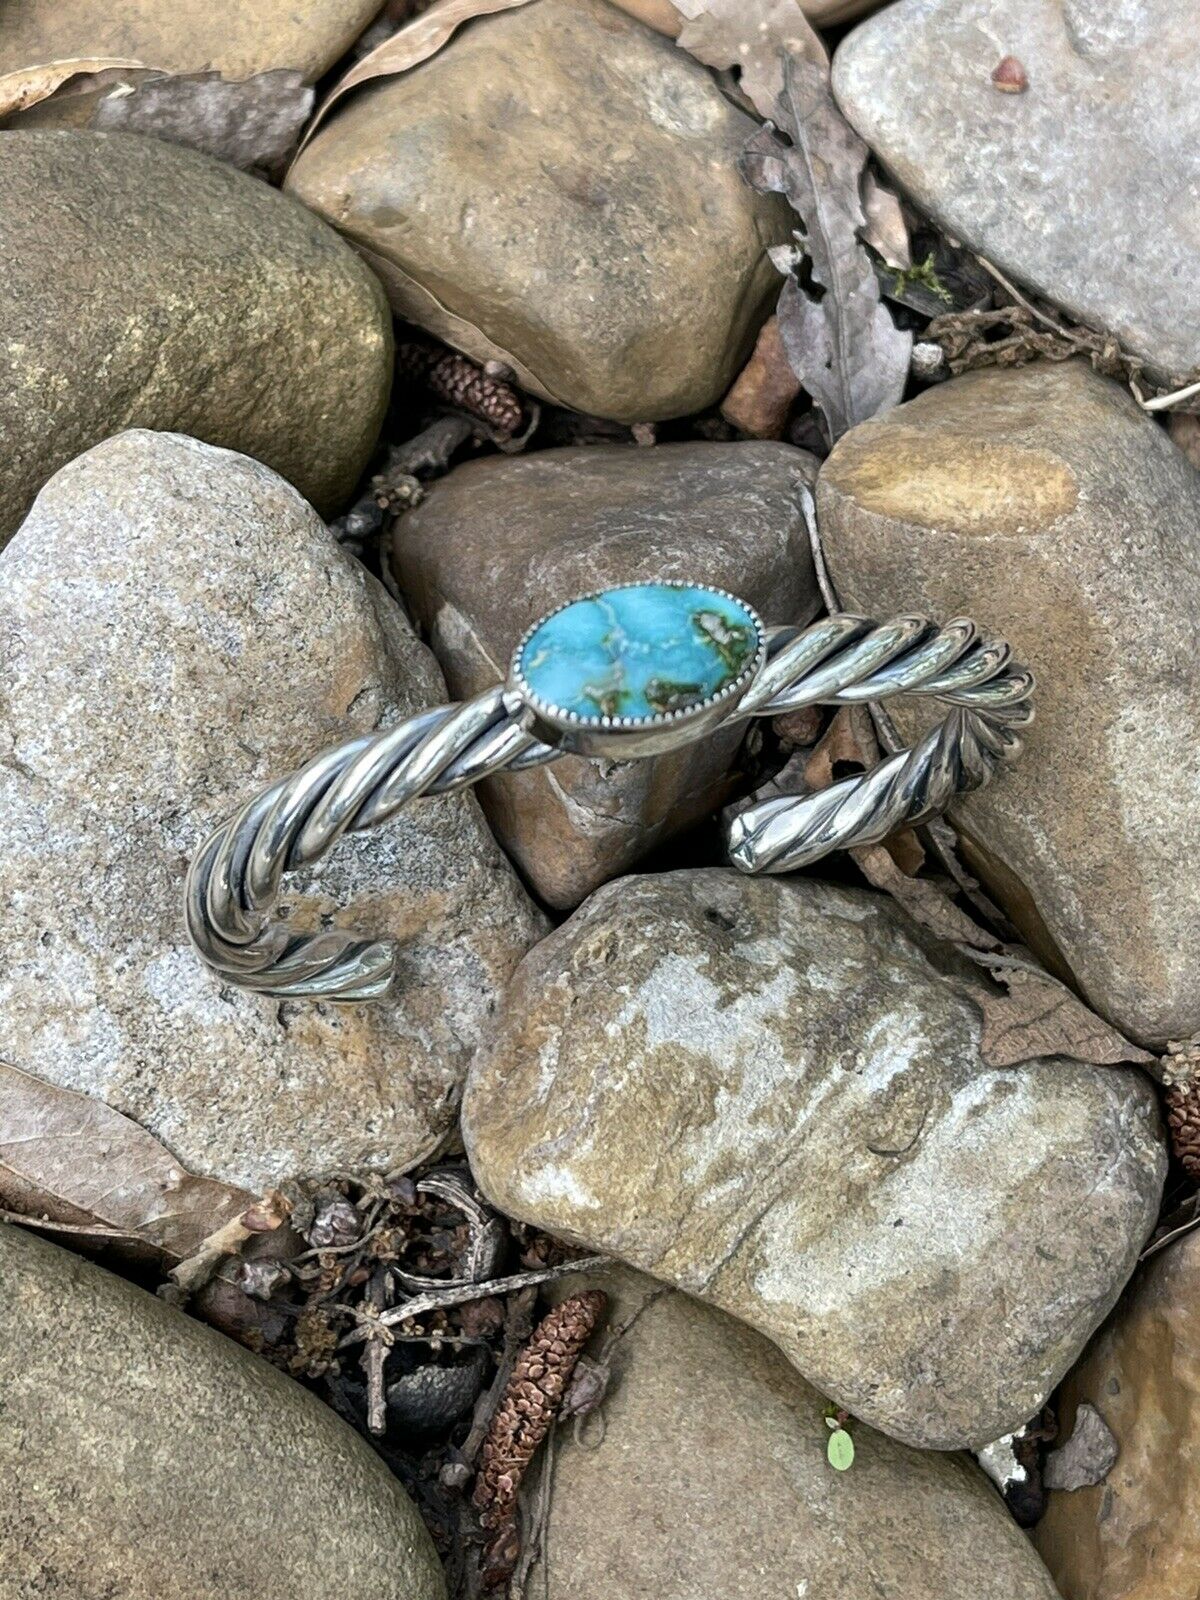 Beautiful Navajo Sterling Sonoran Mountain Turquoise Rope Style Bracelet Cuff